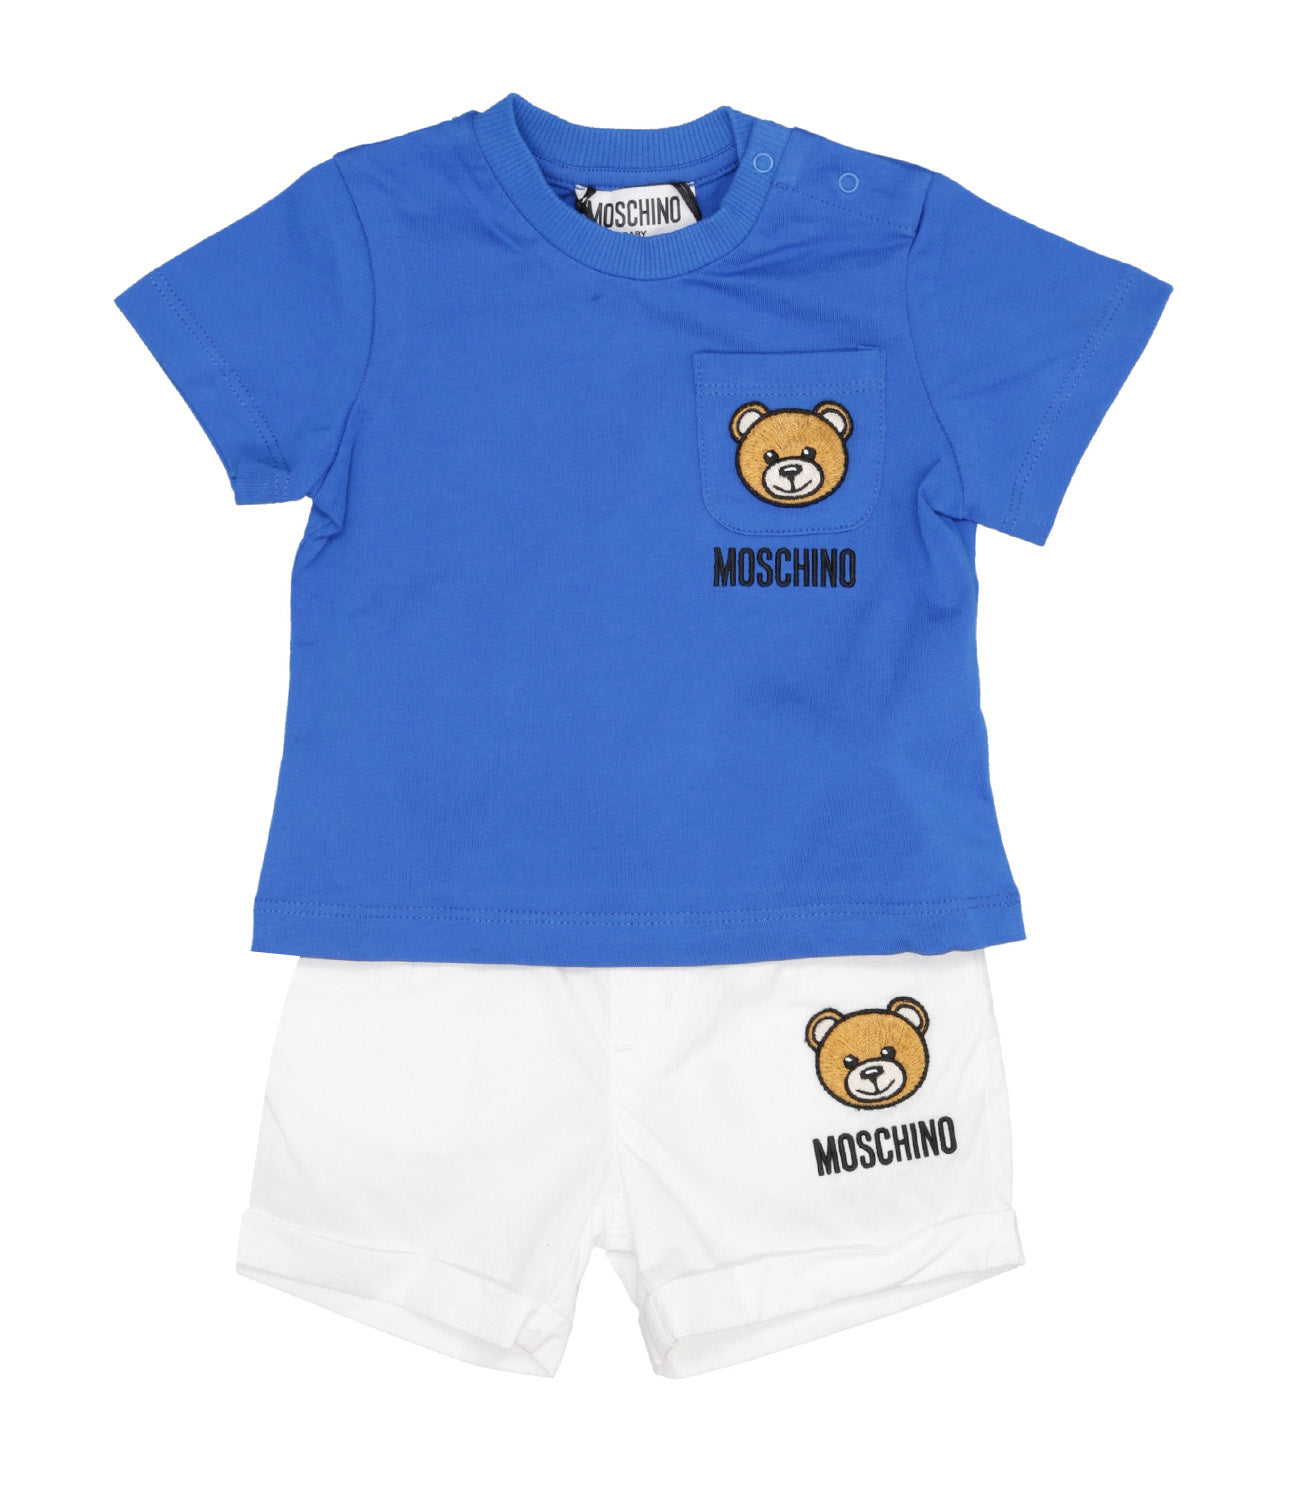 Moschino Baby | Royal Blue and White T-Shirt and Shorts Set